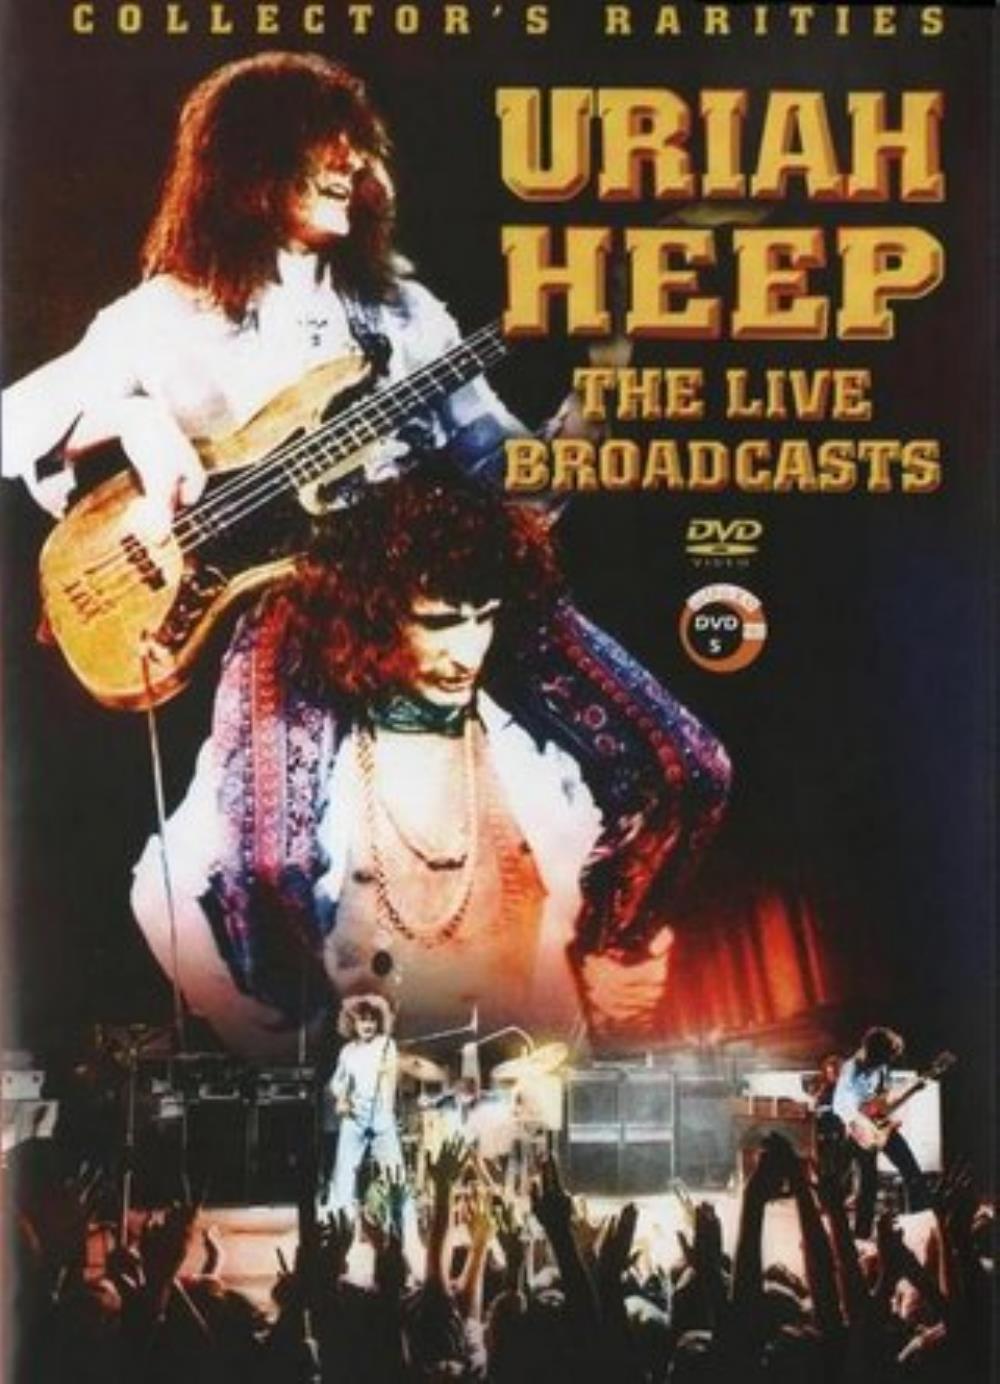 Uriah Heep - The Live Broadcasts CD (album) cover